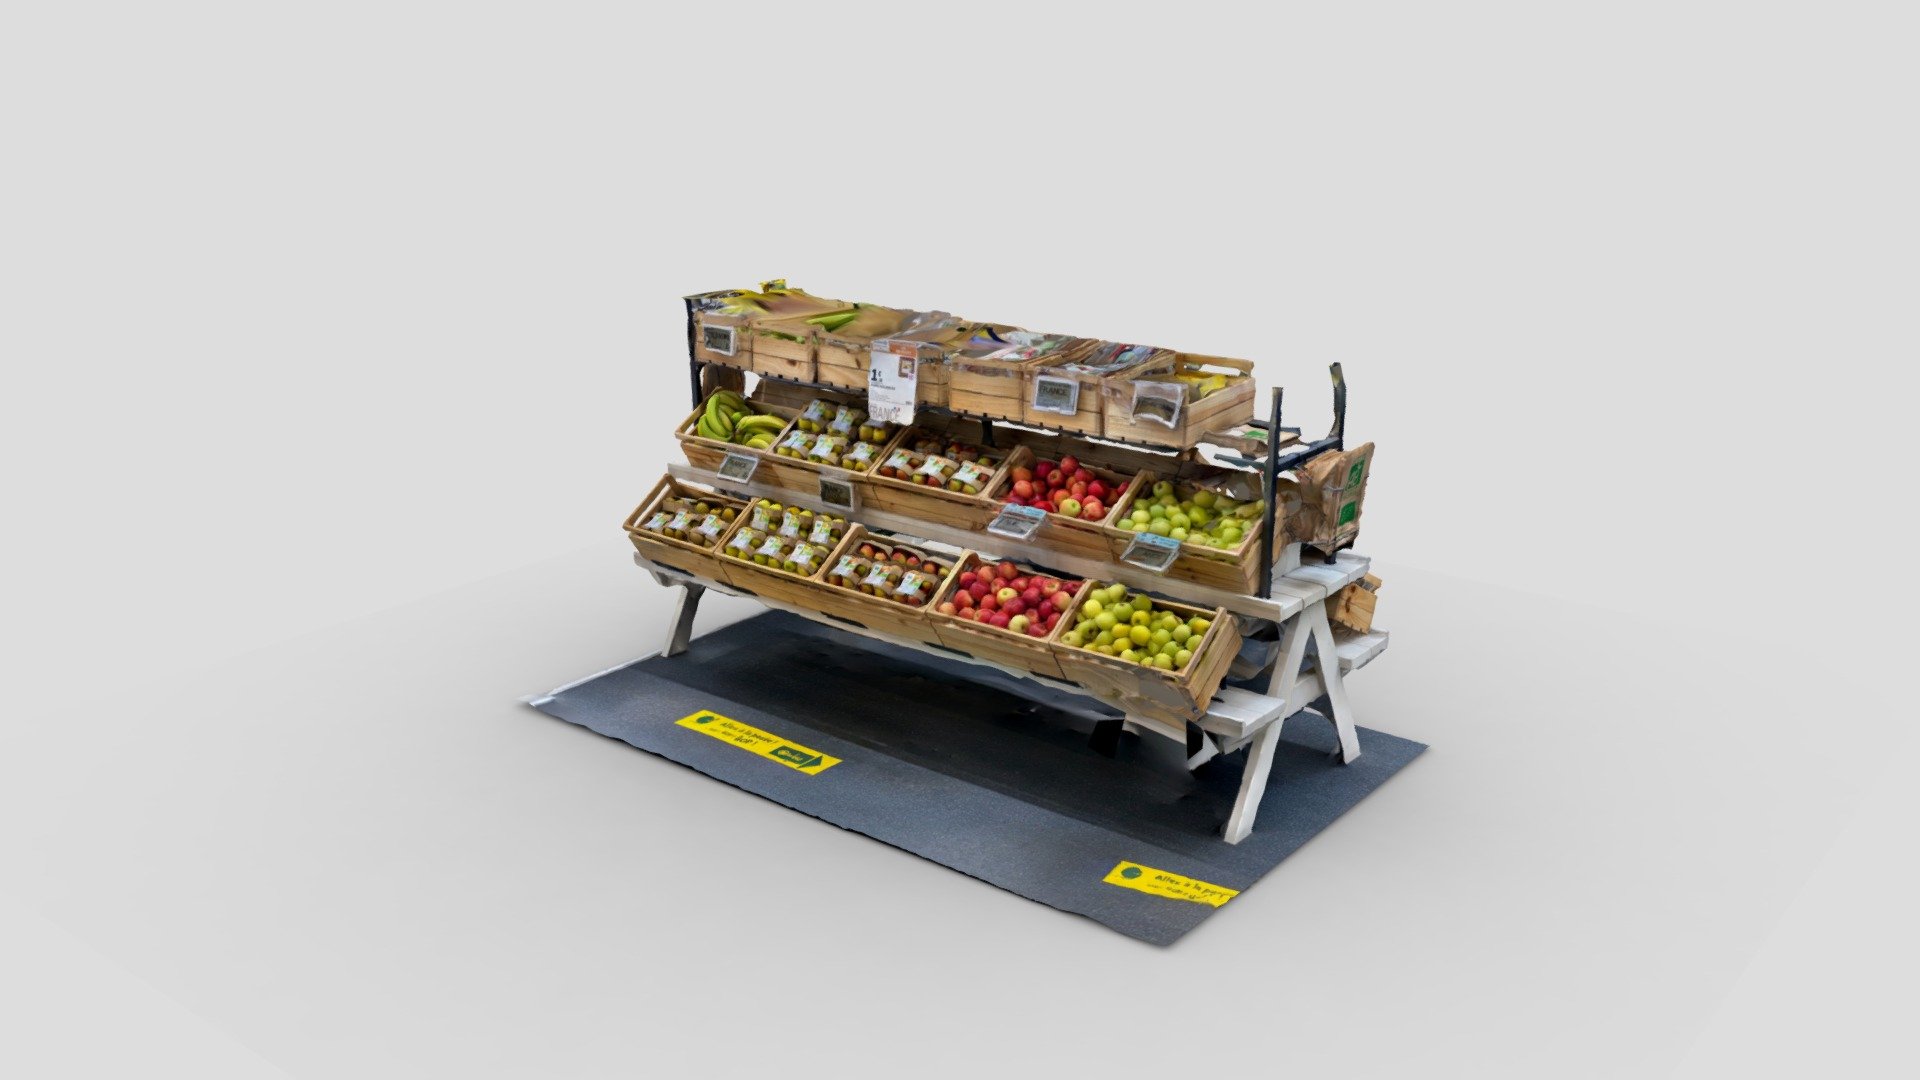 Scan of a Supermarket fruit stand.

Raw scan, not any cleaning process.

This model is distributed under the Creative Commons Attribution 3.0 license. Giving you permission to use, modify and share it for any purpose as long as you give appropriate credit 3d model